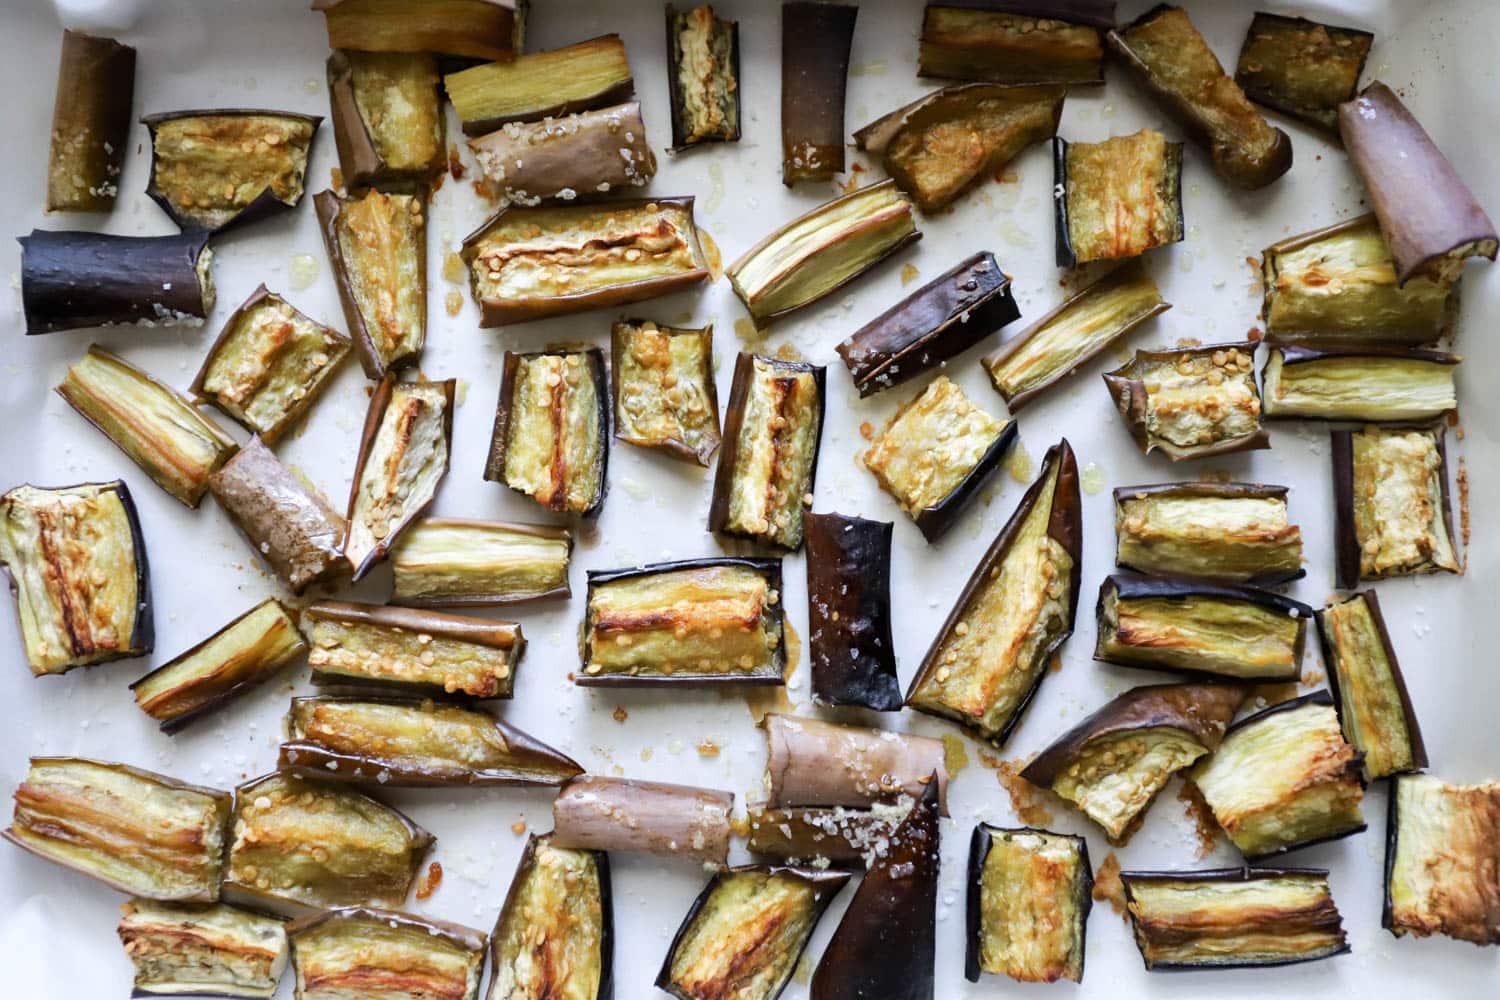 Roasted eggplant pieces on parchment paper.